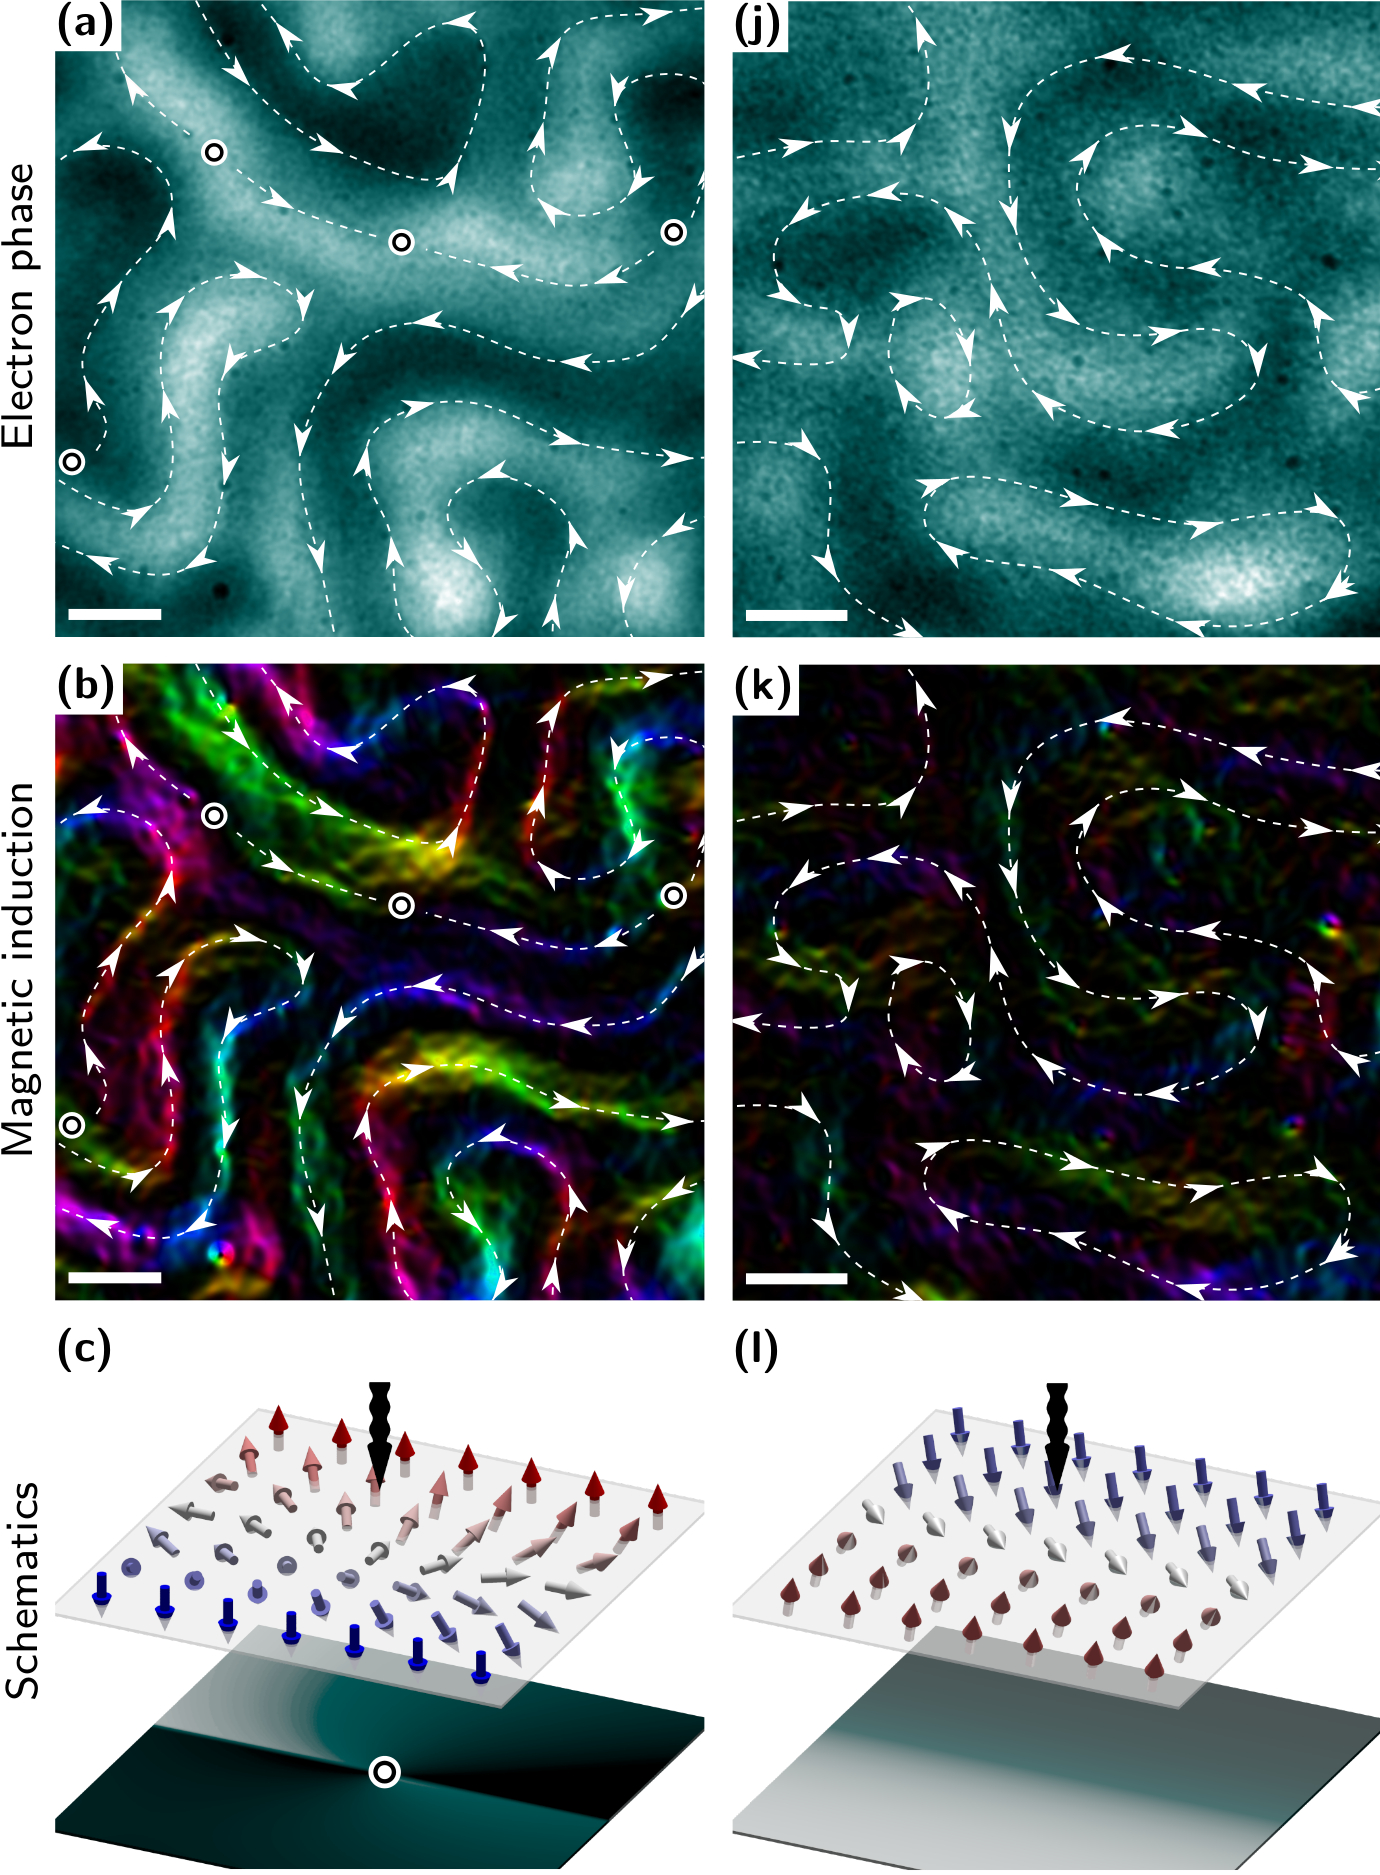 Image - The top row shows electron phase, the second row shows magnetic induction, and the bottom row shows schematics for the simulated phase of different magnetic domain features in multilayer material samples. The first column is for a symmetric thin-film material and the second column is for an asymmetric thin film containing gadolinium and cobalt. The scale bars are 200 nanometers (billionths of a meter). The dashed lines indicate domain walls and the arrows indicate the chirality or “handedness.” The underlying images in the top two rows were producing using a technique at Berkeley Lab’s Molecular Foundry known as Lorentz microscopy. Click the image to view at a larger size. (Credit: Berkeley Lab)